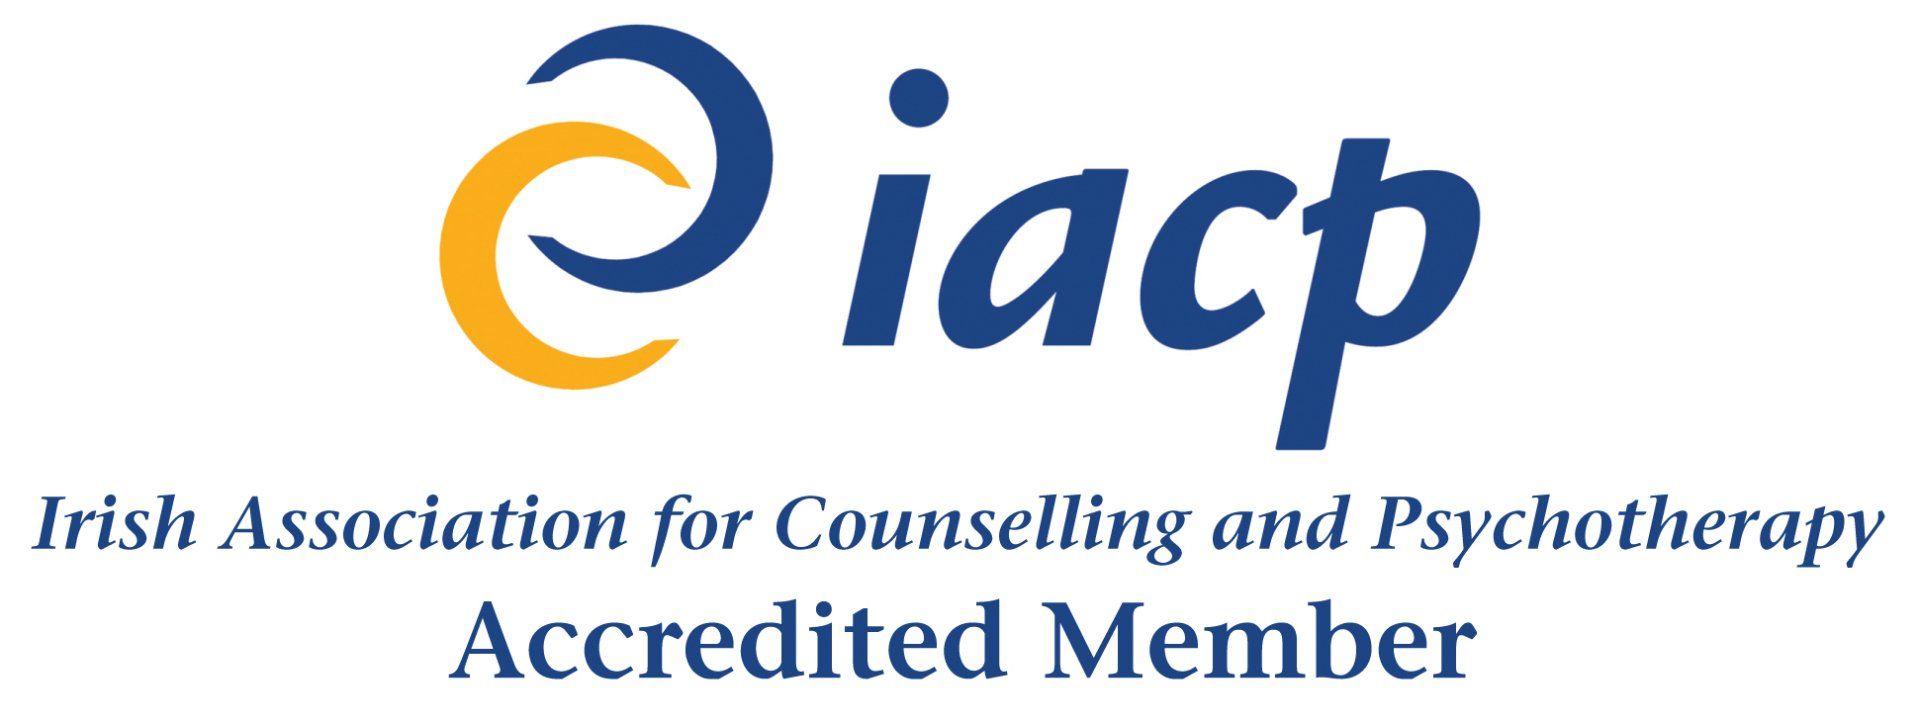 Irish Association of Counselling and Psychotherapy